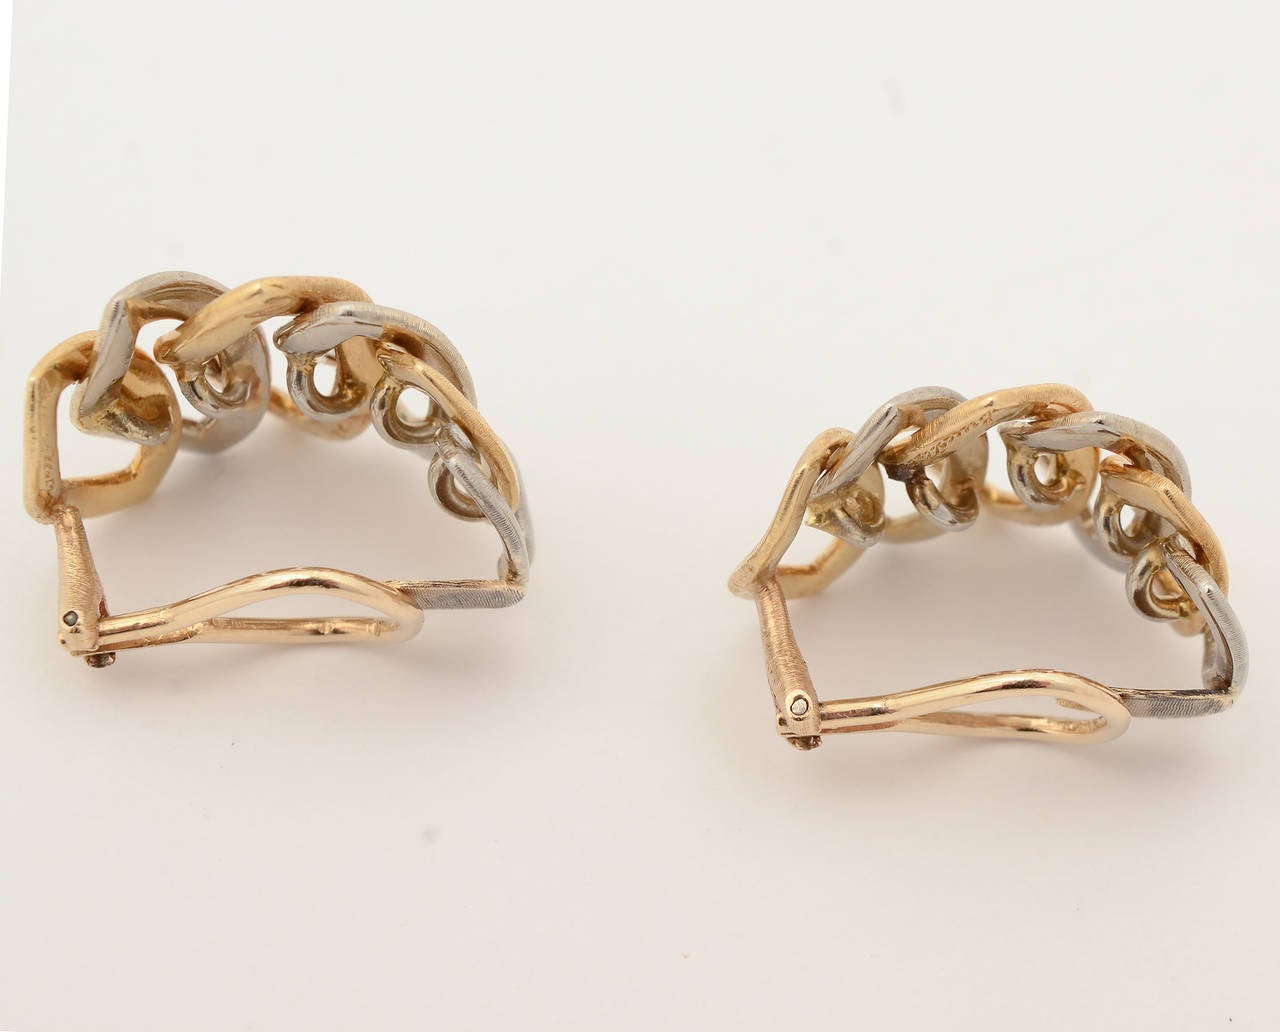 Lozenge shaped links  combine to form hoops in these wonderful Buccellati earrings. They are alternating yellow and white gold. Clip backs. Measurements are1" in length and 13/16" width.